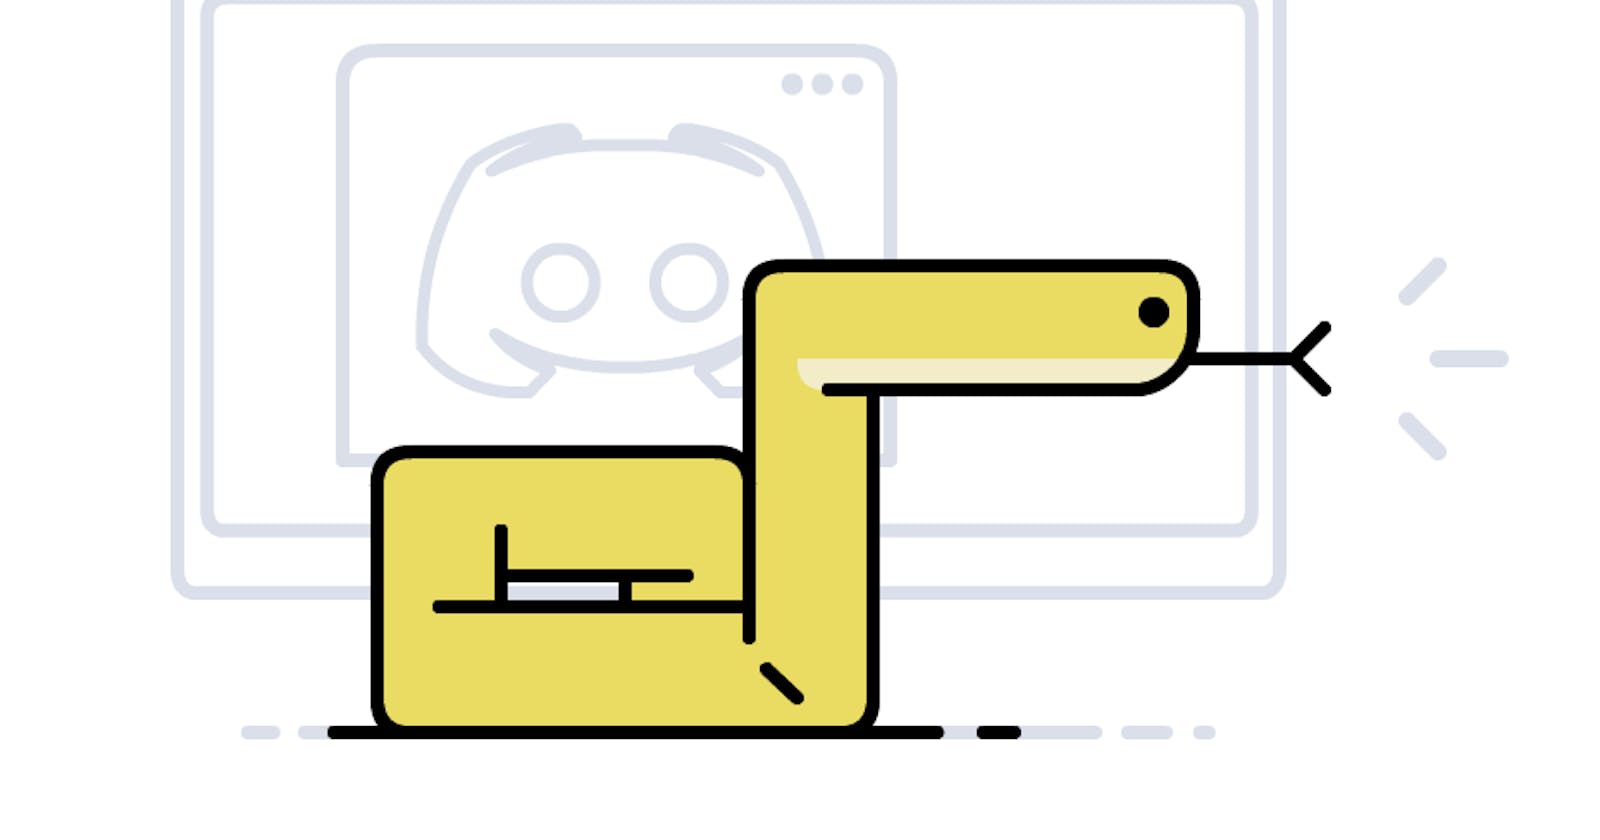 Learn to make a simple Discord Bot using Python.